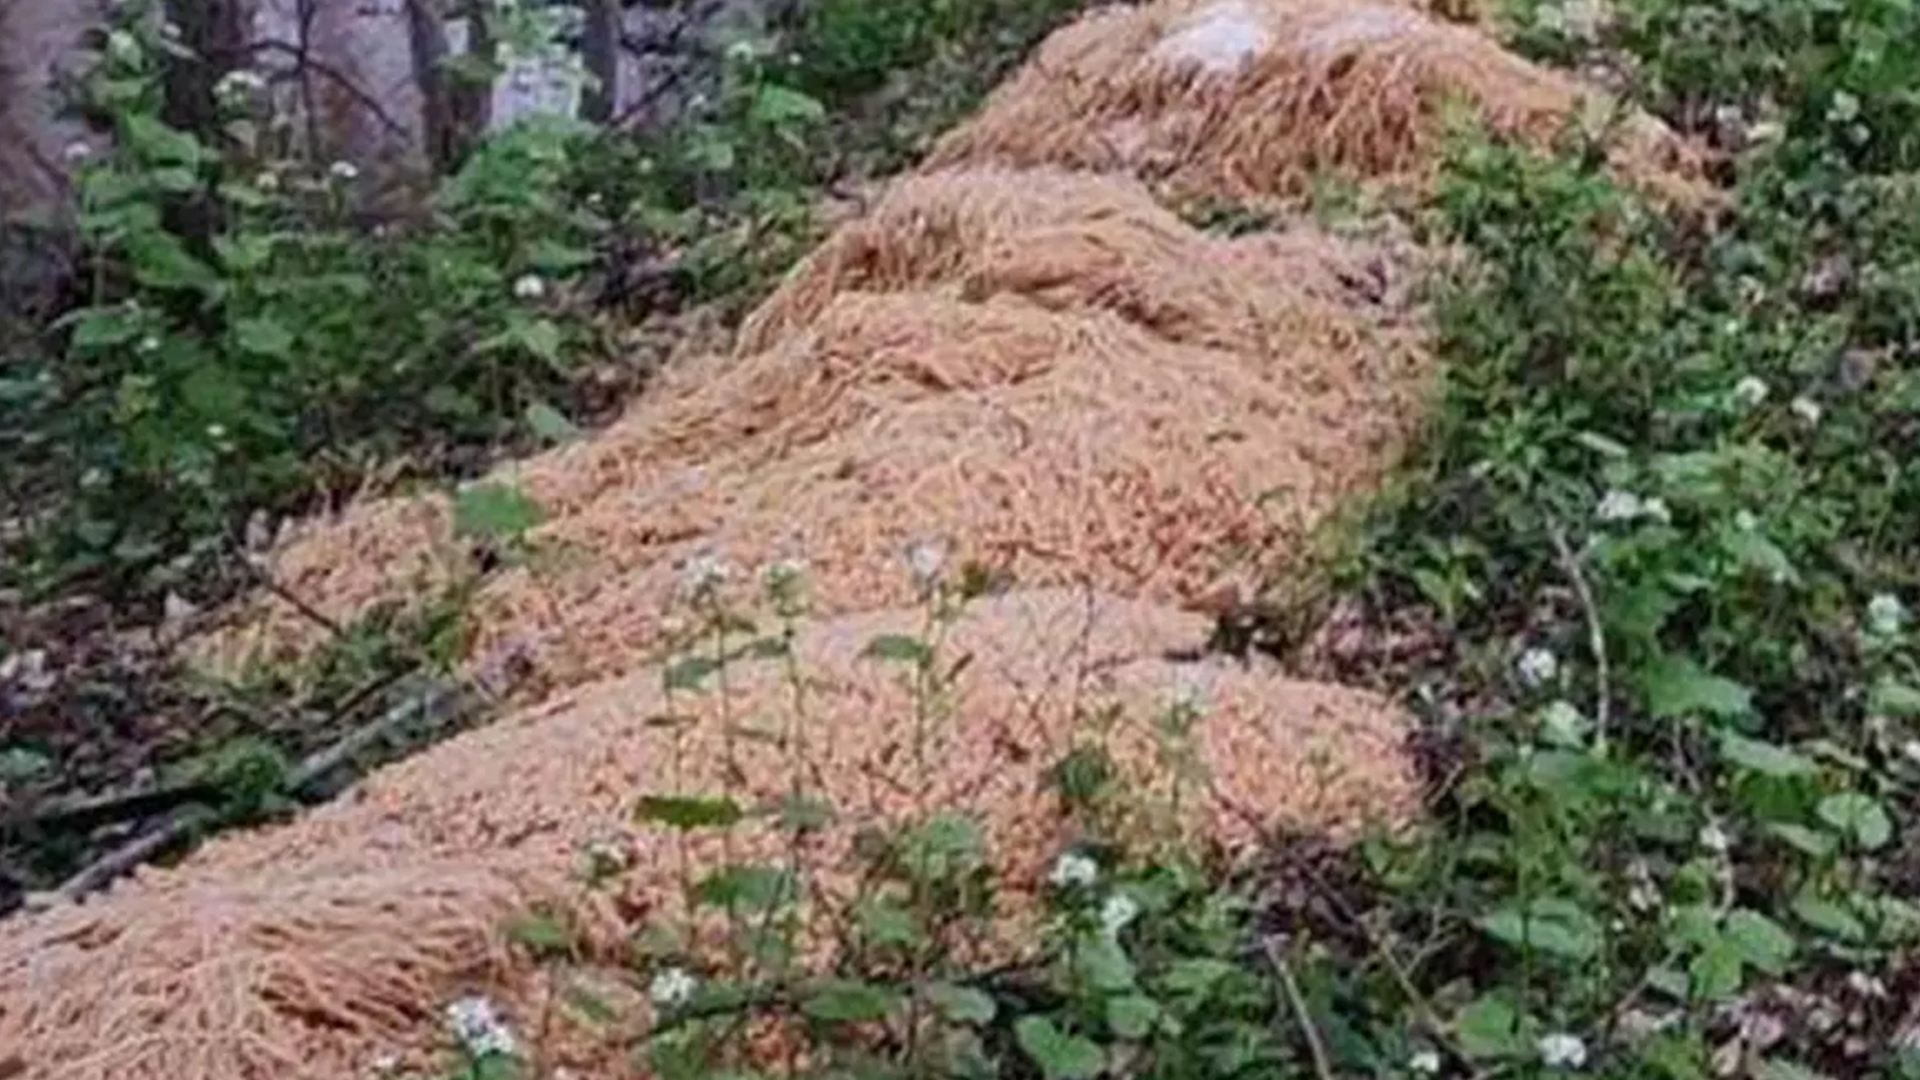 Recent residents are baffled by the bizarre mystery of hundreds of pounds of pasta appearing in the woods.